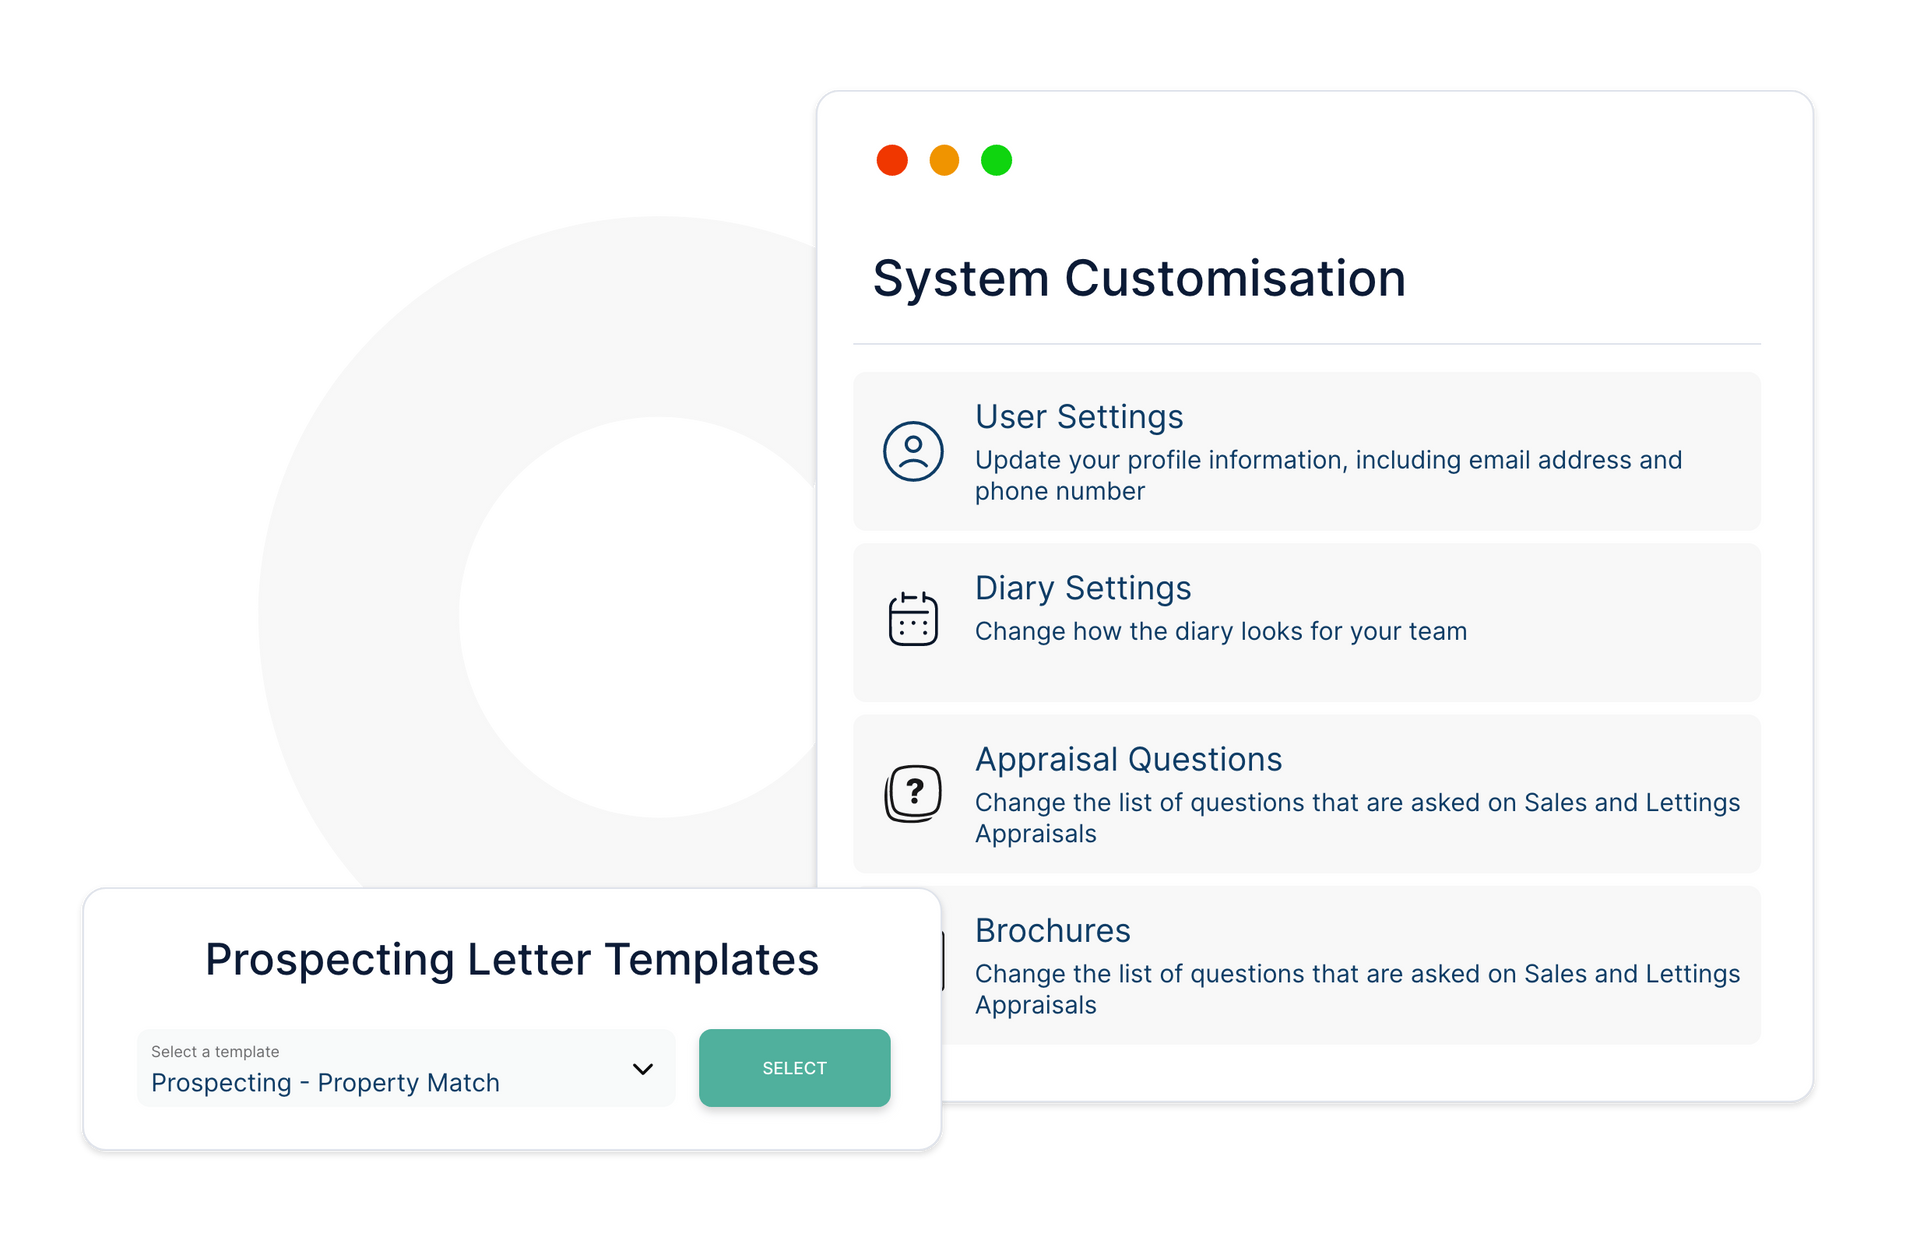 A screenshot of a system customisation page for prospecting letter templates.